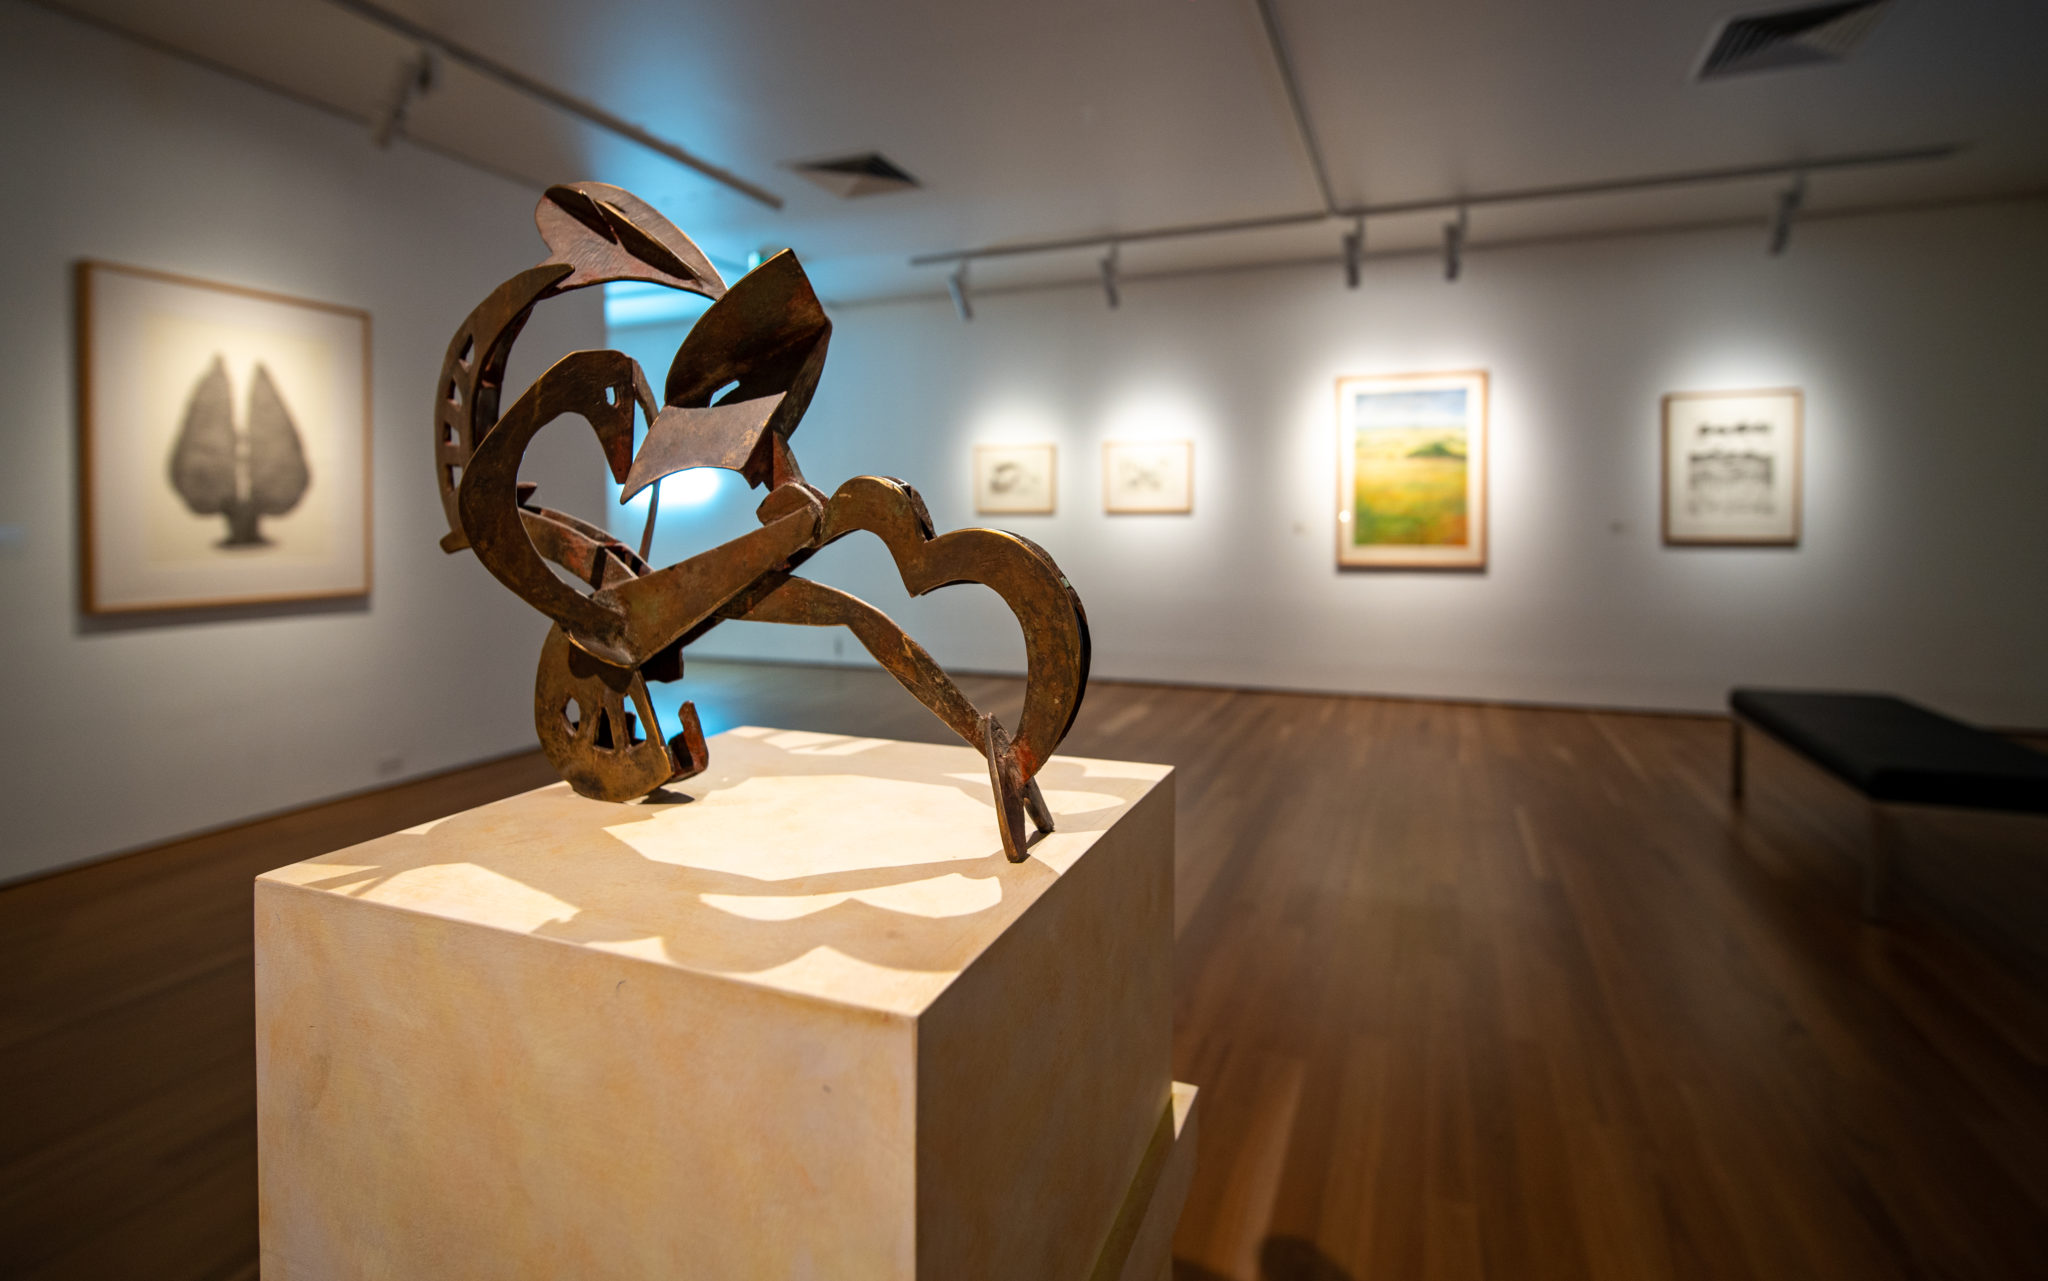 Exhibition documentation of 50 Years, 50 Artists, at Latrobe Regional Gallery, 2021. Pictured: Dan Wollmering, Sure and Plenty II (detail), 1987-88, MDF and bronze, 31 x 36 x 11 cm, Latrobe Regional Gallery Collection, purchased with assistance of the Victorian Regional Galleries Art Foundation, 1989.